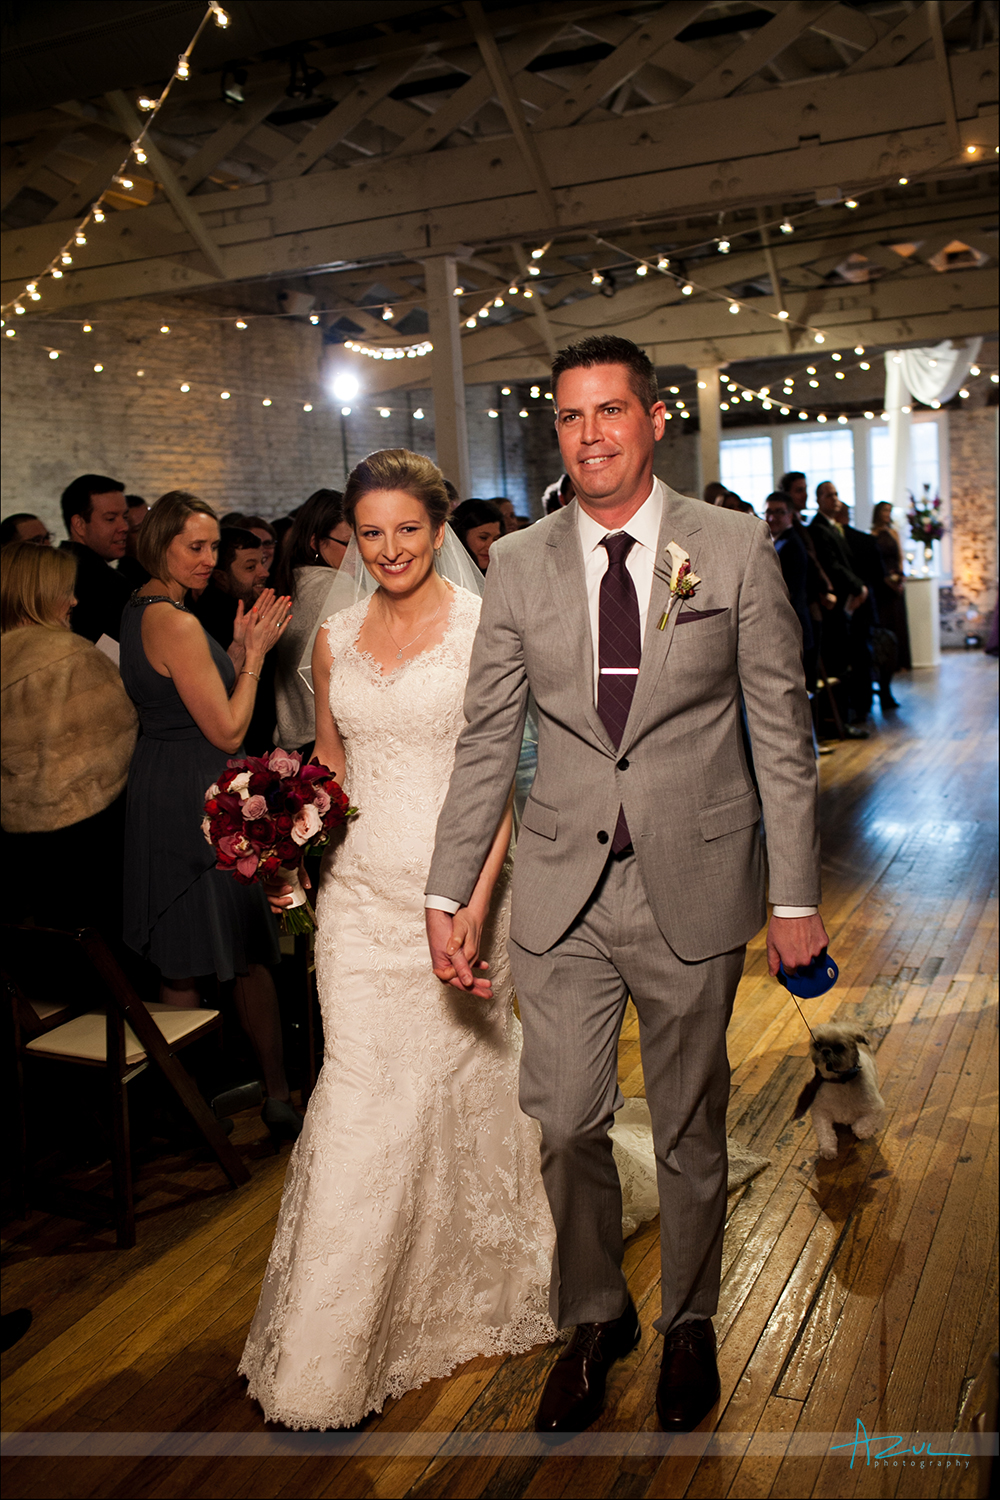 End of ceremony photograph of bride and groom at The Stockroom in Raleigh